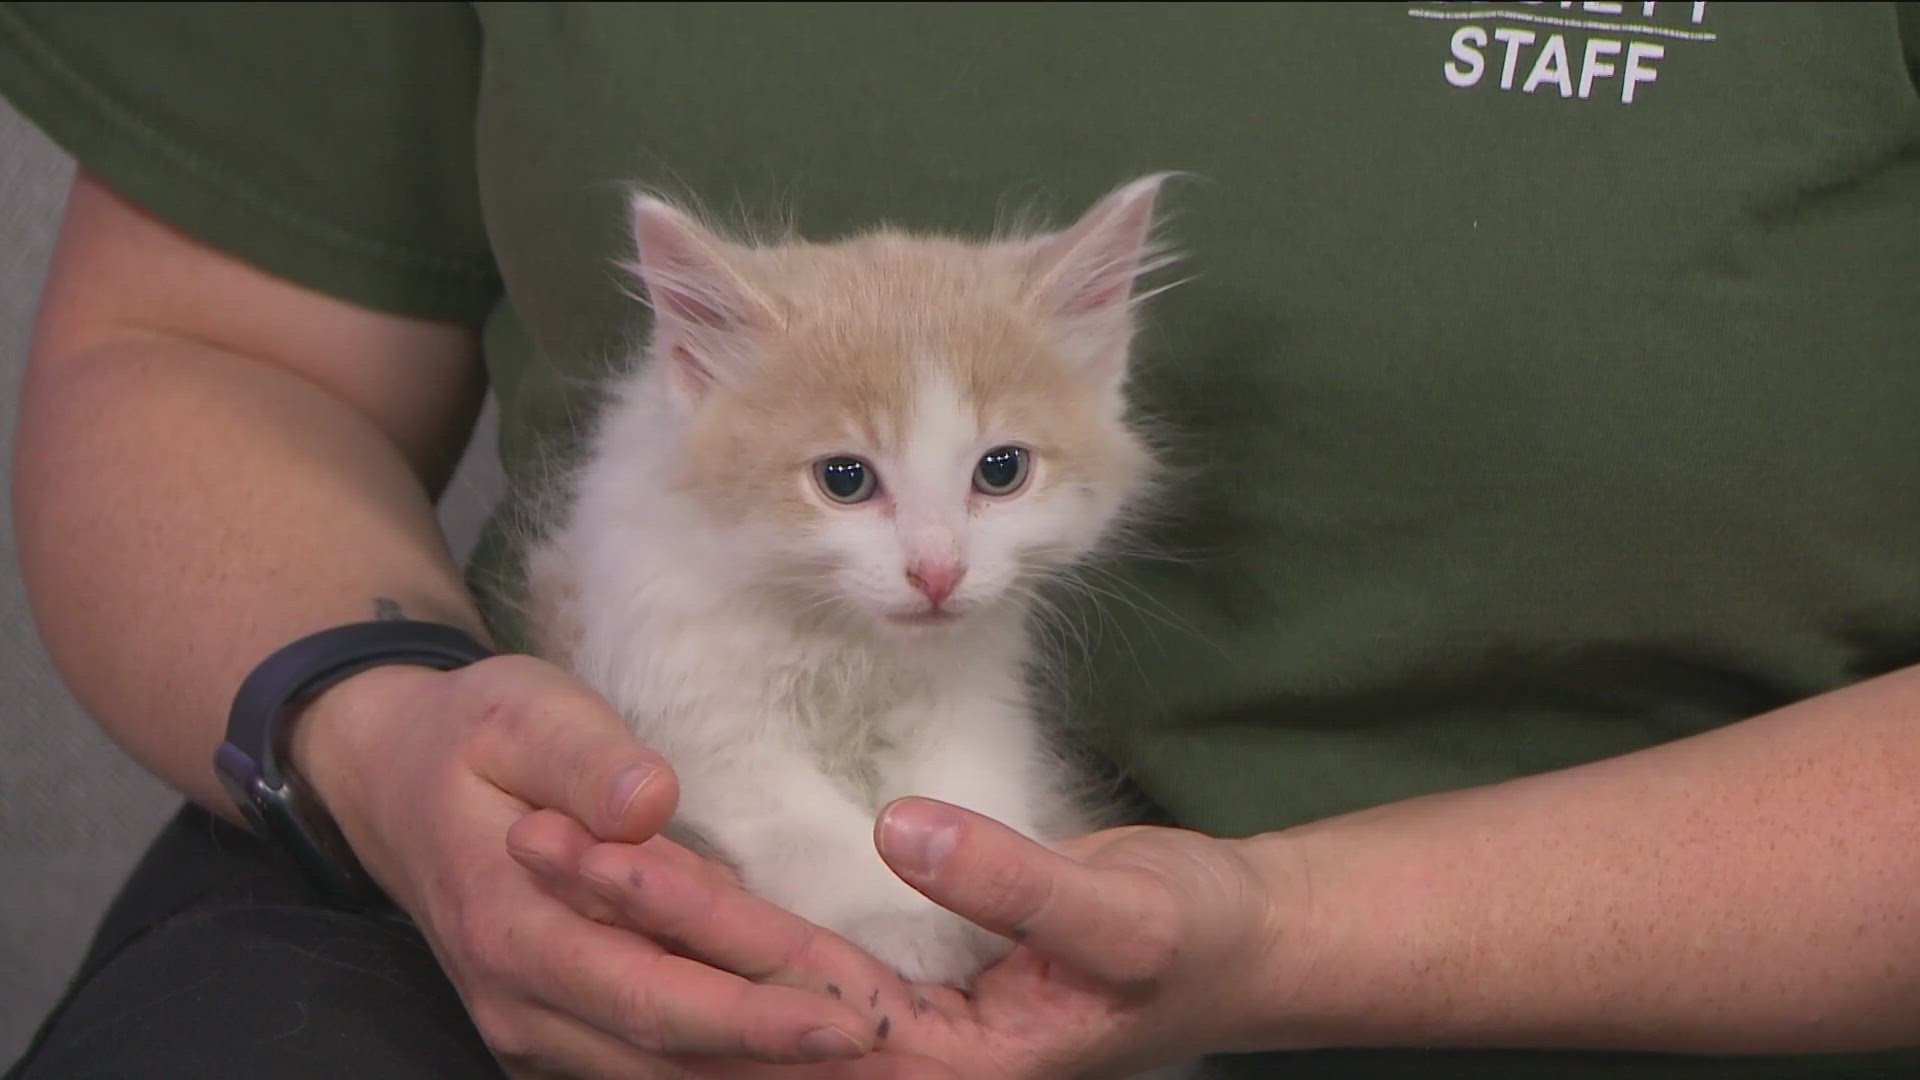 The Idaho Humane Society is in the KTVB studio with a kitten named Post Malone - we discuss how to become a foster parent to animals in need.